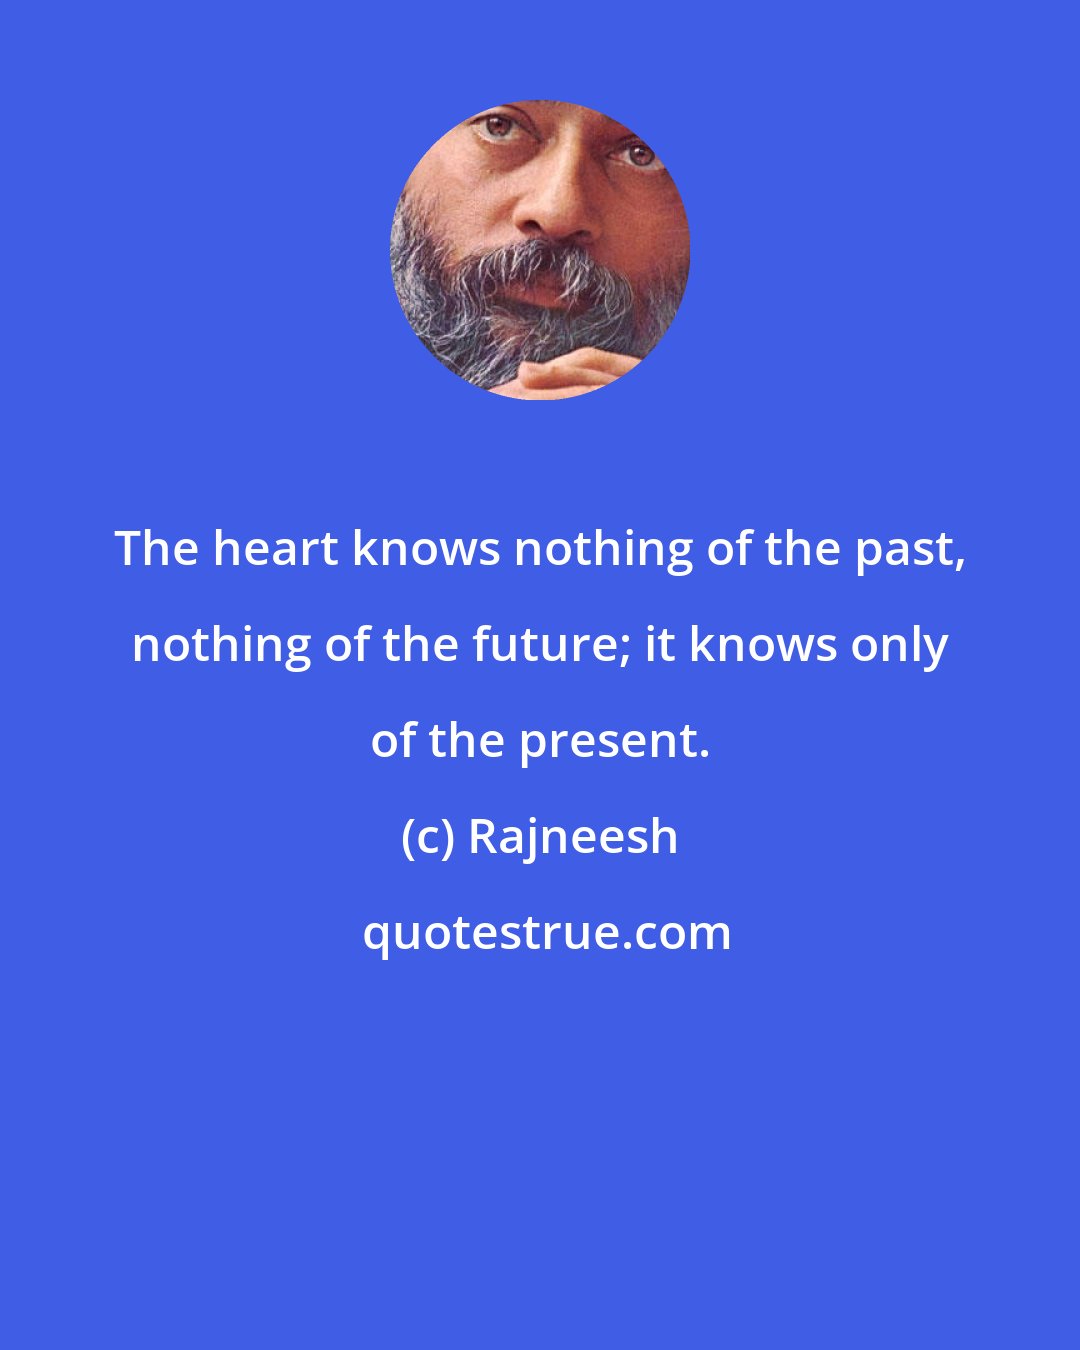 Rajneesh: The heart knows nothing of the past, nothing of the future; it knows only of the present.